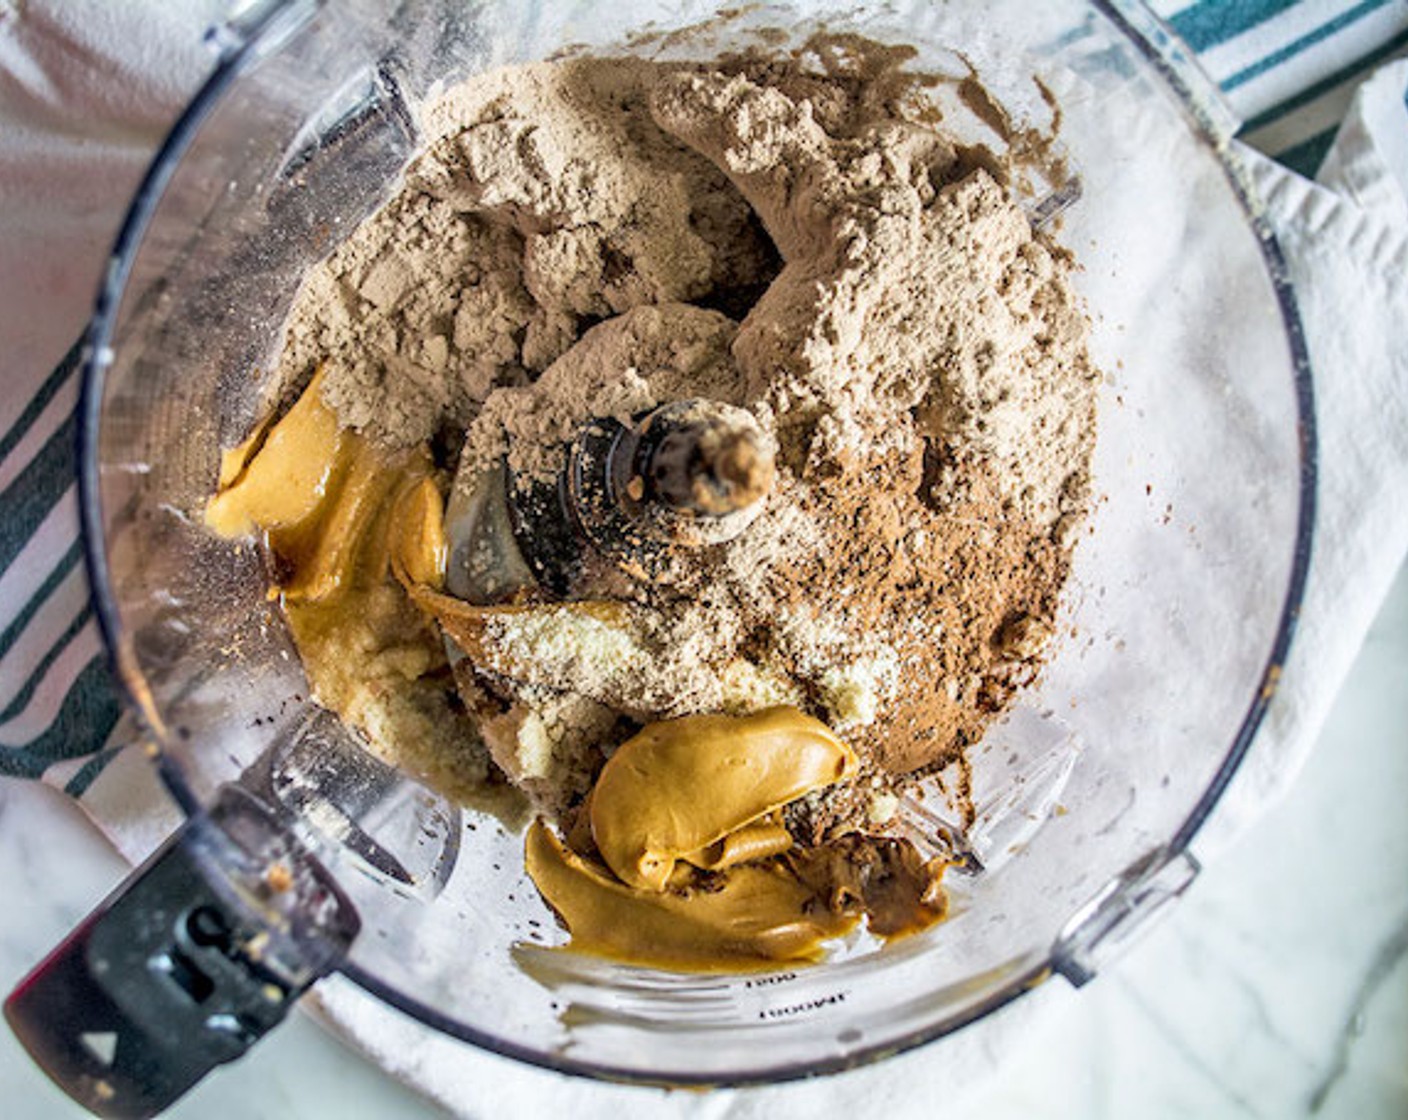 step 2 Add Almond Butter (1/2 cup), Medjool Dates (1 cup), Cacao Powder (1/2 cup), Chocolate Protein Powder (2 scoops), Maple Syrup (3 Tbsp), Almond Meal (2 Tbsp), and Water (2 Tbsp) to a bowl of the food processor.